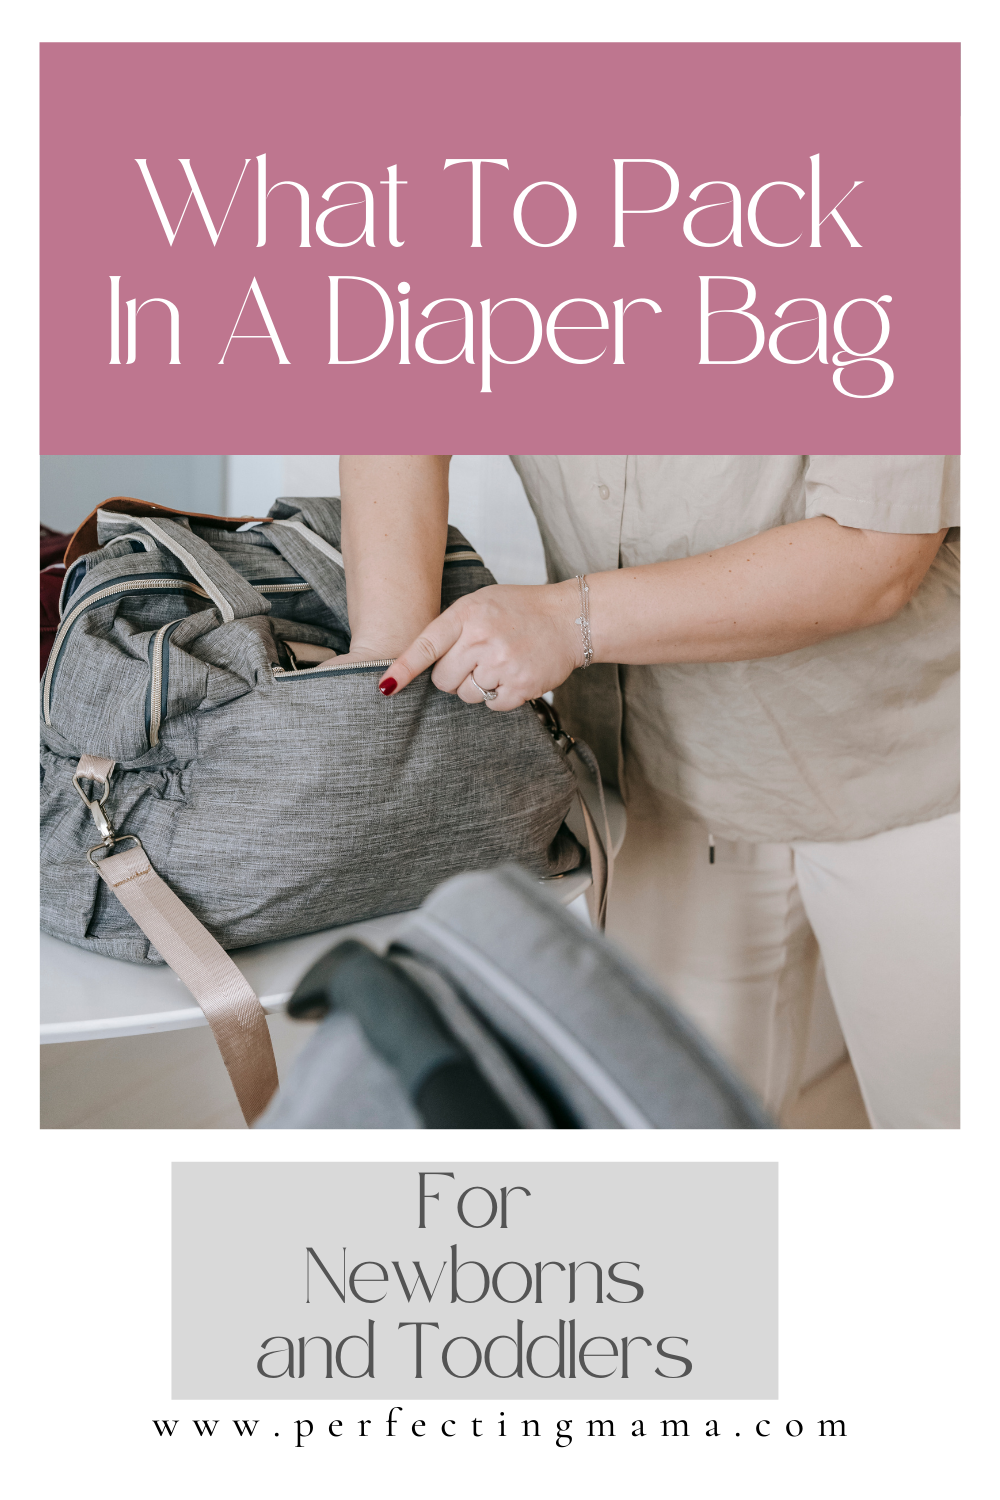 What To Pack In A Diaper Bag- For Newborns And Toddlers